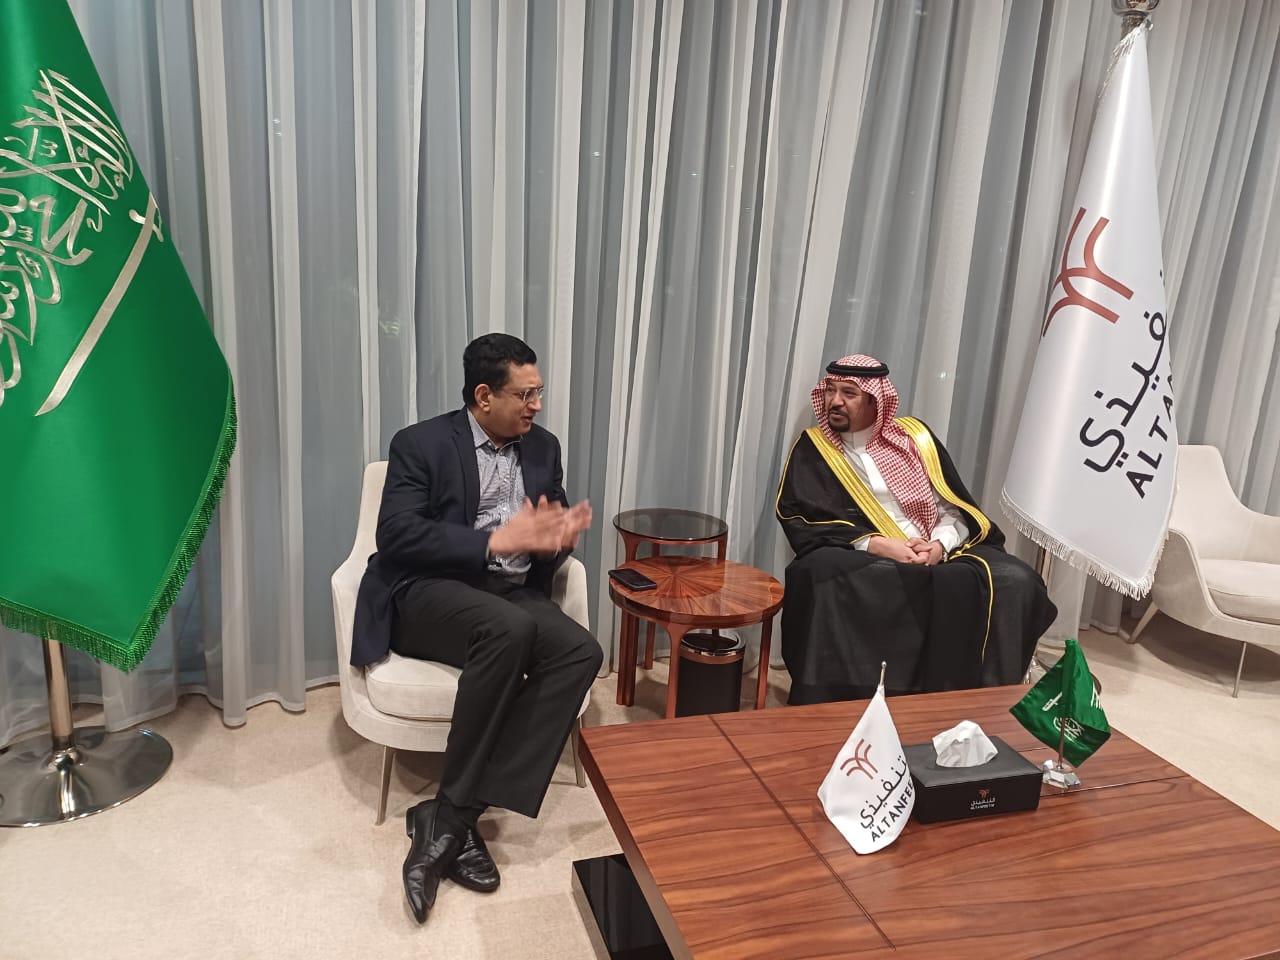 You are currently viewing Consul General Falah Alhabshi Mowlana received Hon. Ali Sabry, Minister of Foreign Affairs of Sri Lanka at the Airport – Jeddah.